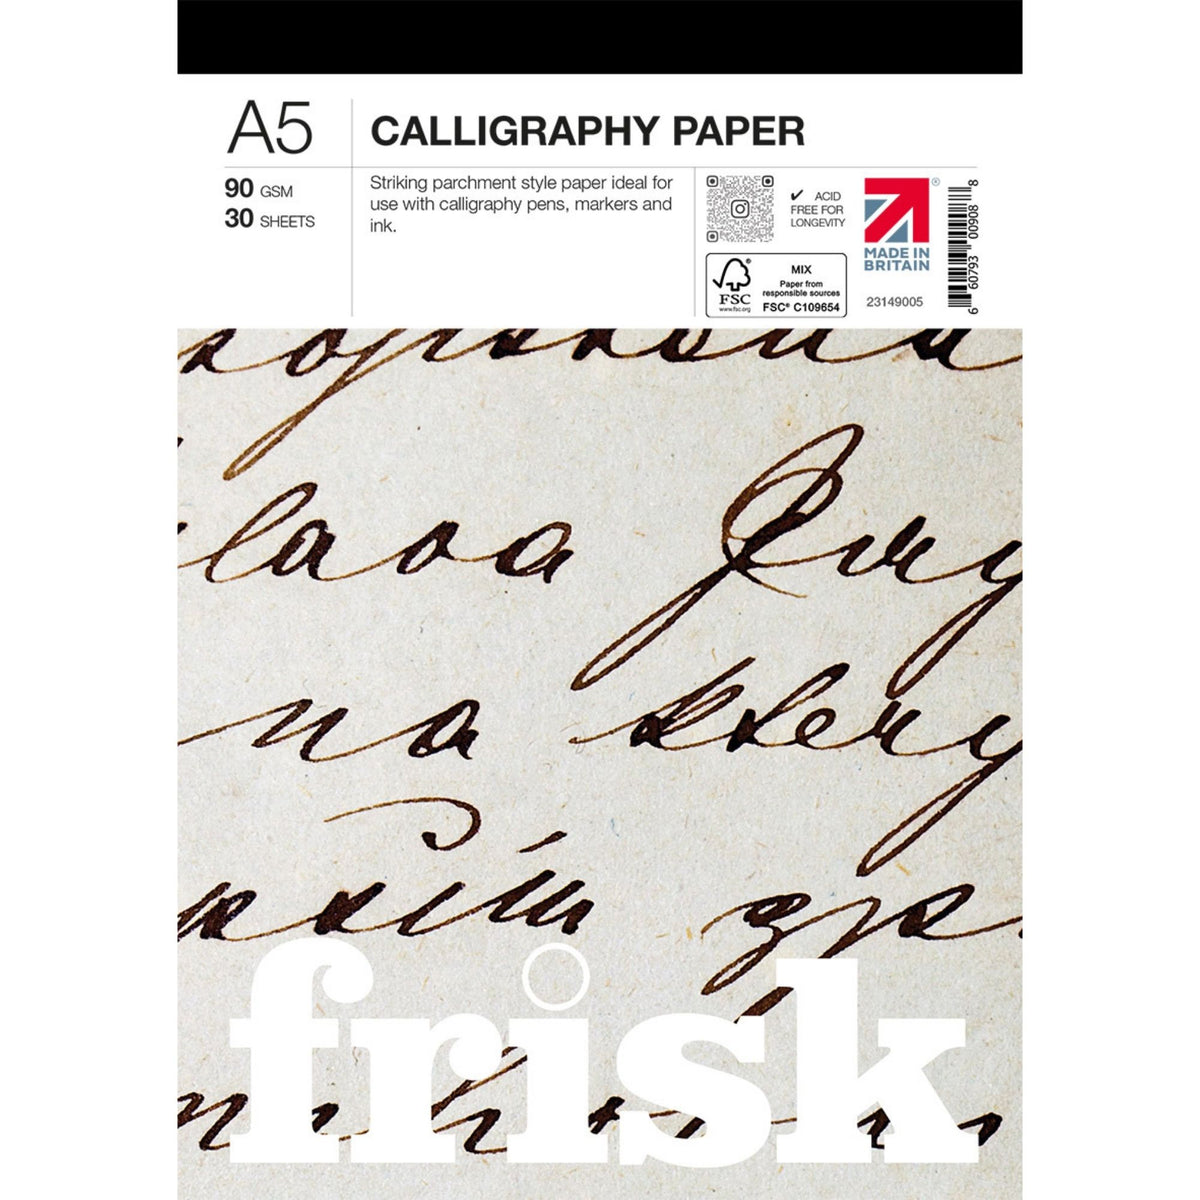 Frisk Calligraphy Paper Pad 90gsm - 30 Sheets - A5